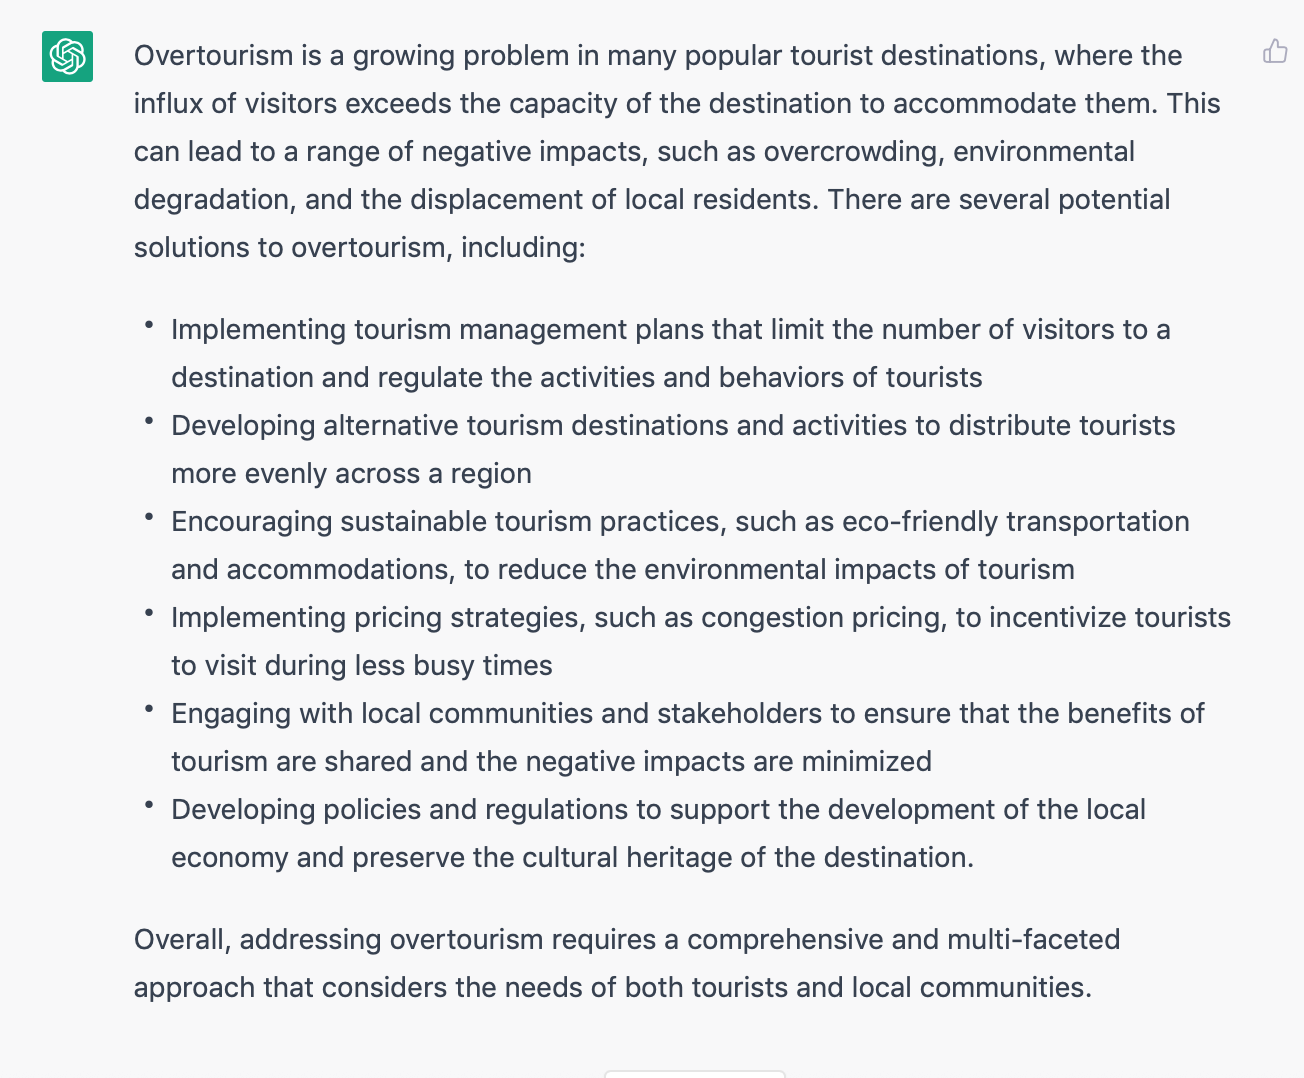 What are solutions to Overtourism in destinations?